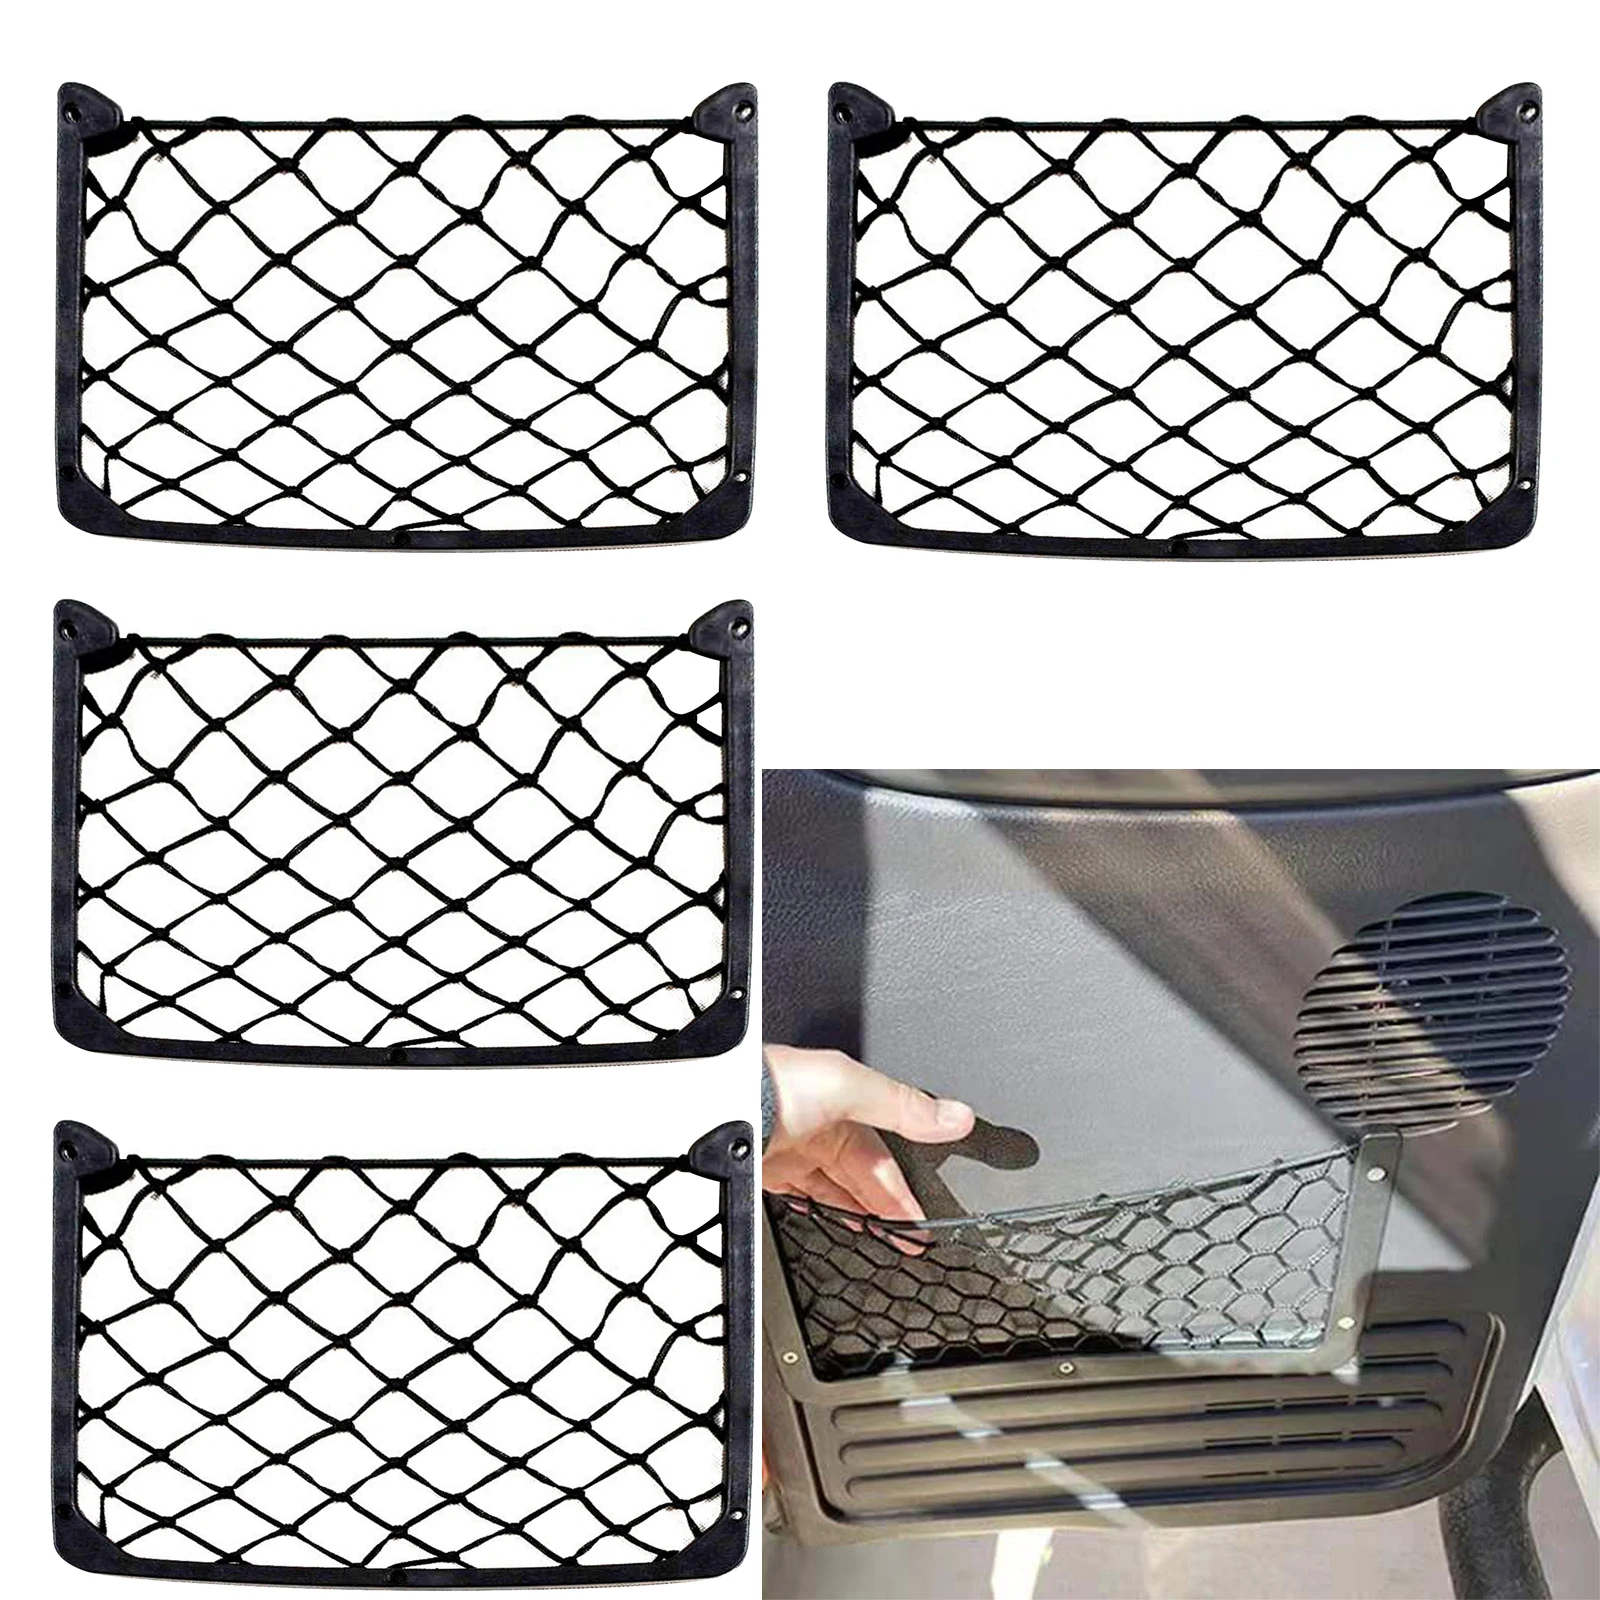 Car Storage Net Large Size ABS Plastic Netting Bag for Car Frame Stretch Mesh Net Universal Cargo with Screws for RV Car Trunk 75w iron plastic welding kit for repair tpo teo pp in car bumpers rod mesh auto welder electric soldering iron welding rods